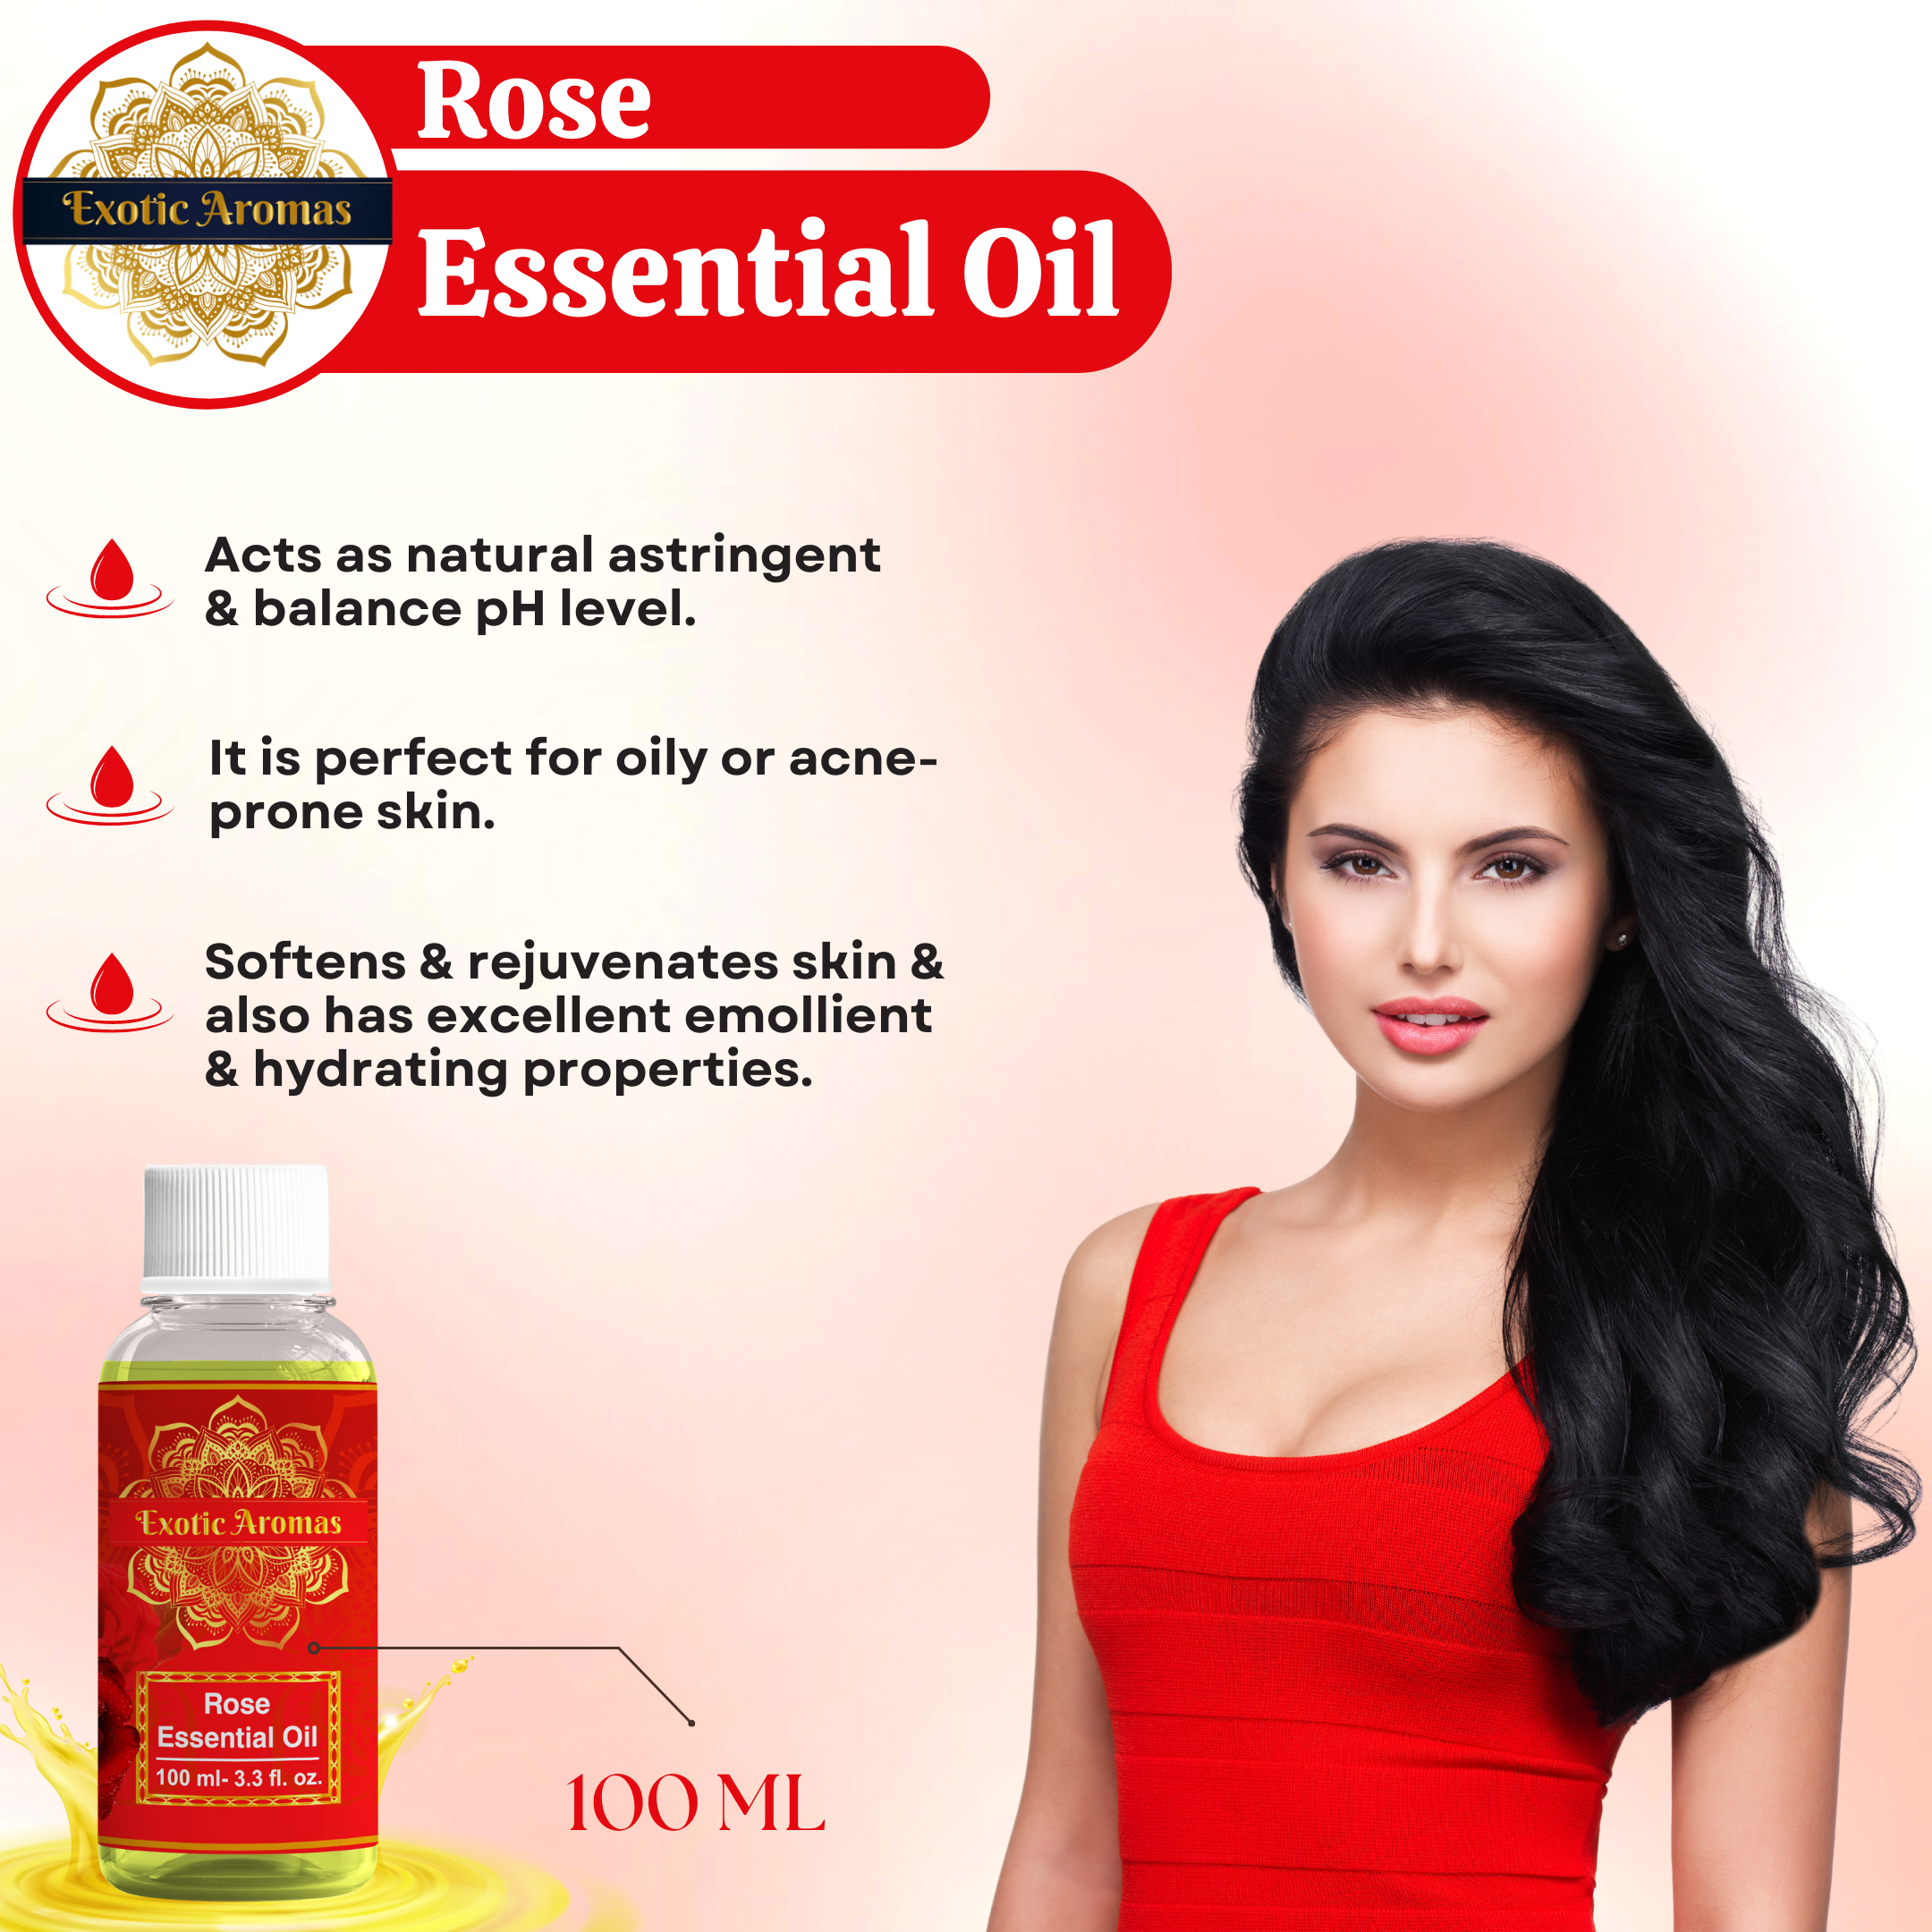 Rose essential oil, Pure, Natural and Organic